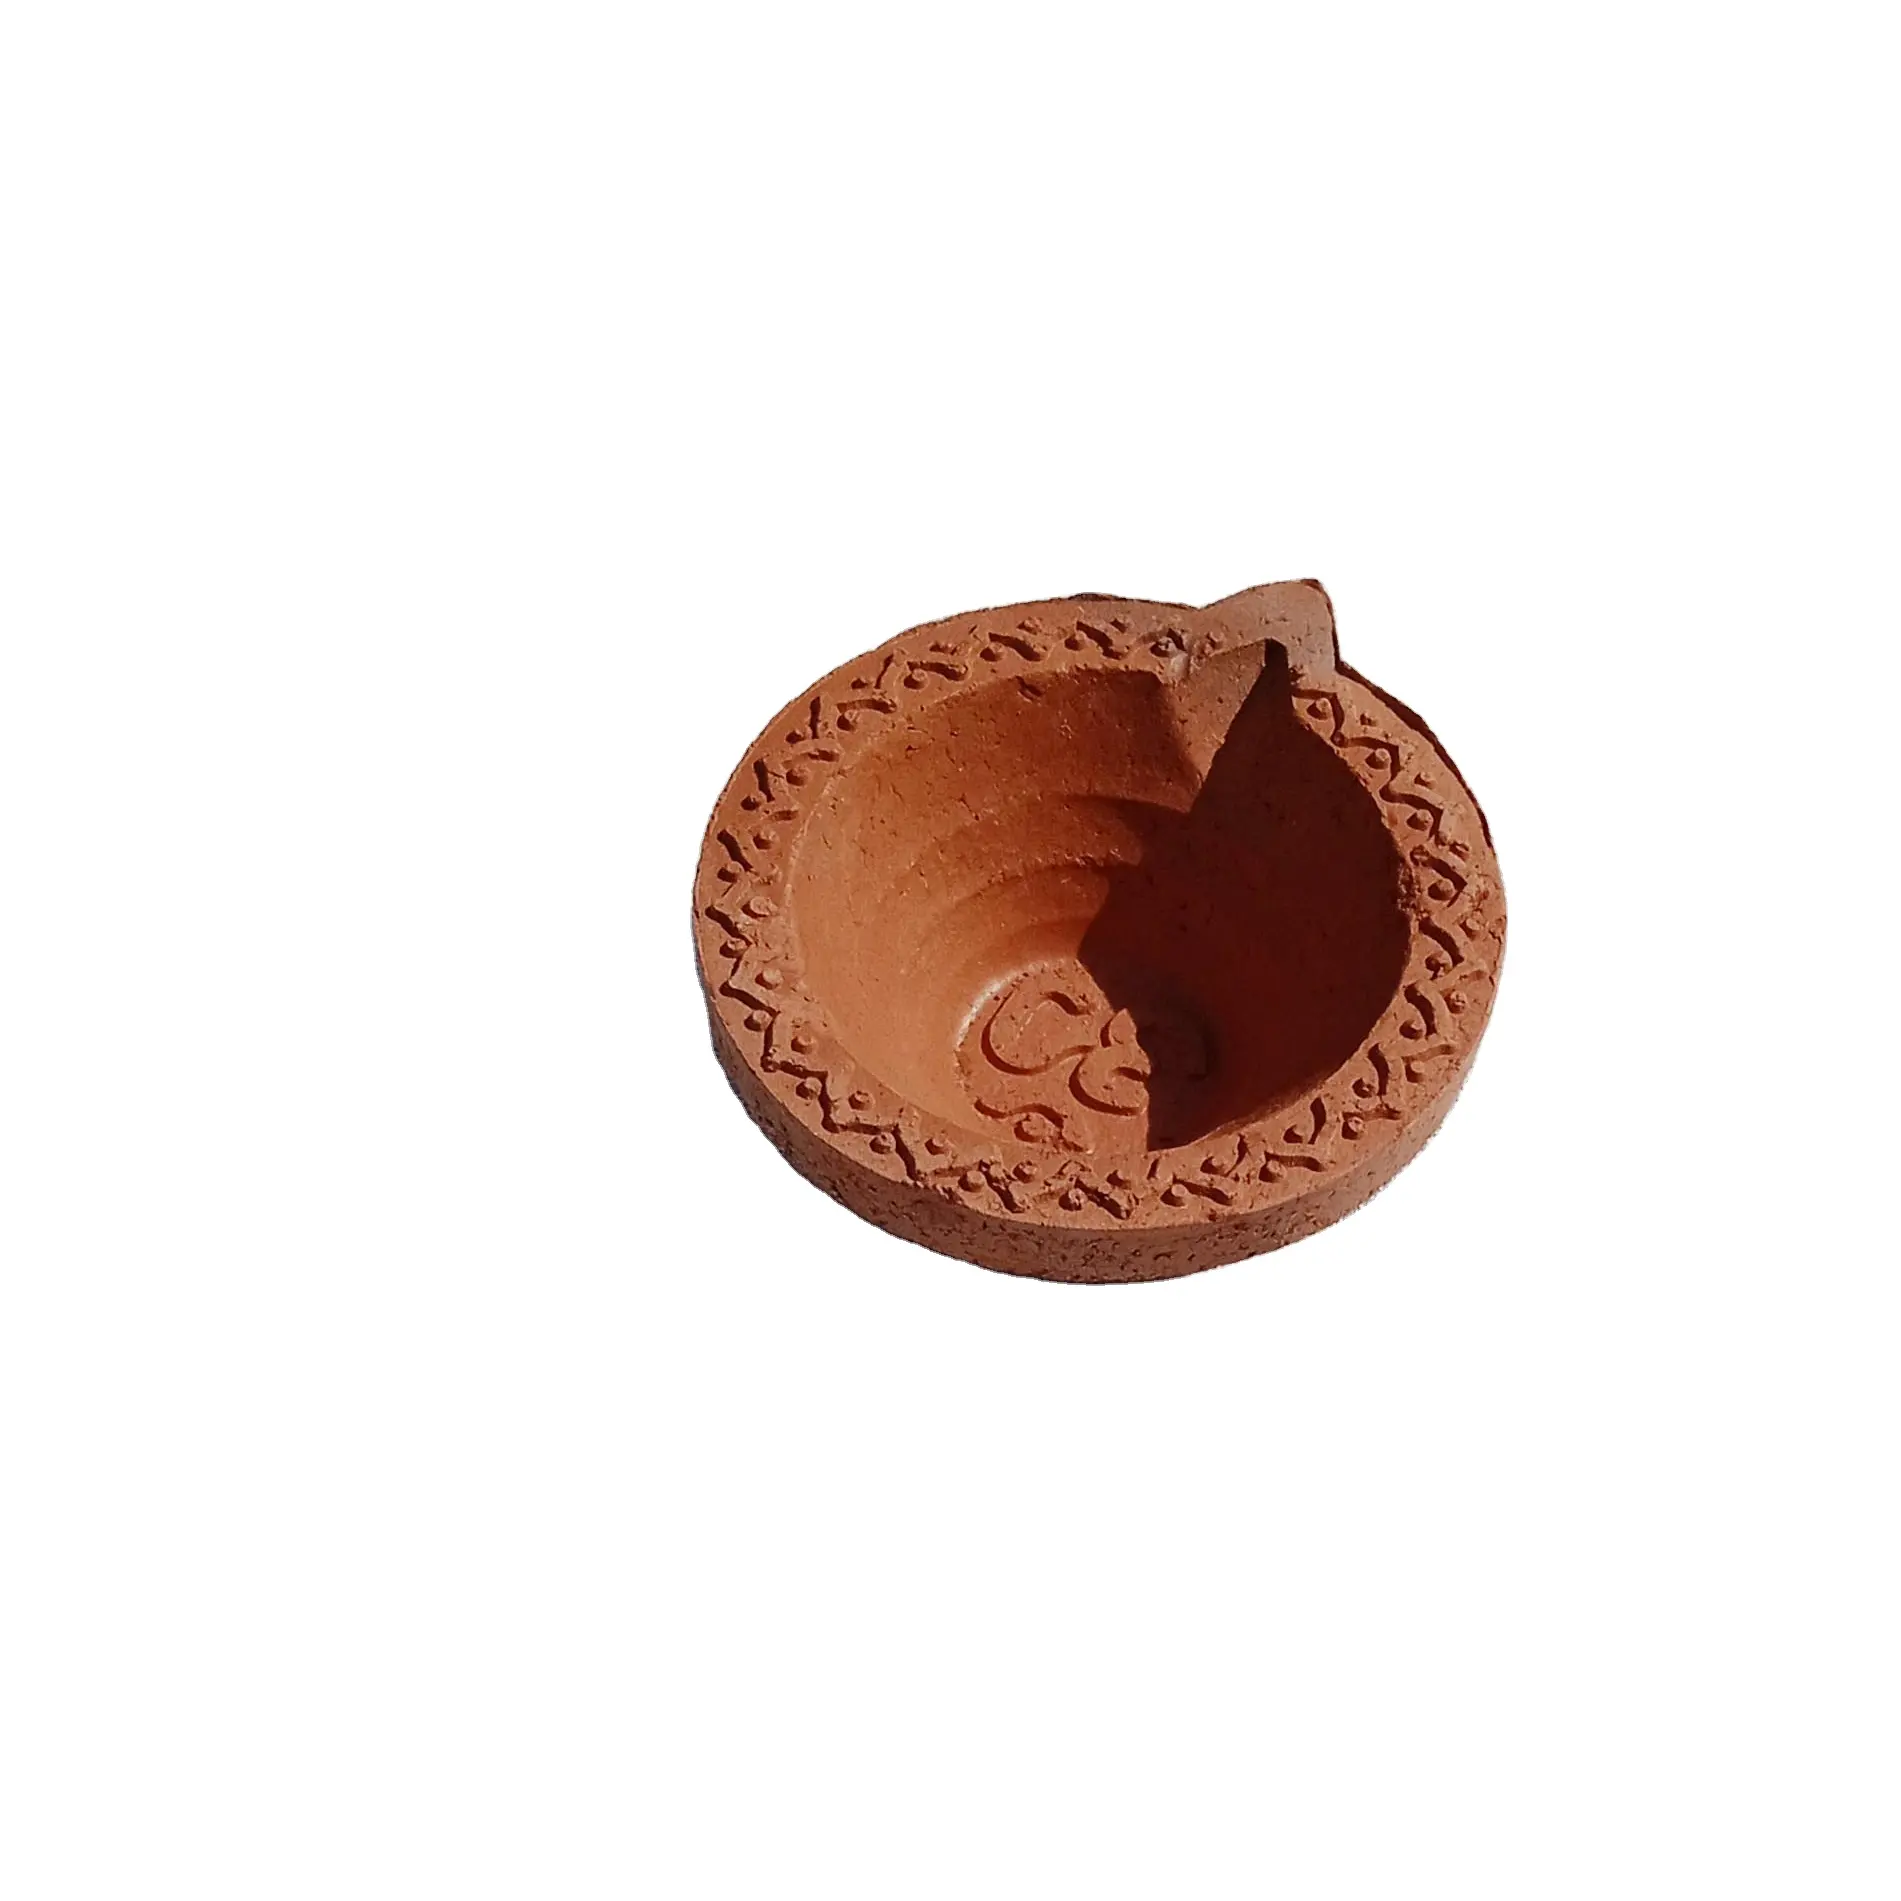 Natural clay terracotta Handmade red clay diwali diyas oil lamps deepak for diwali festival and rituals in small sizes